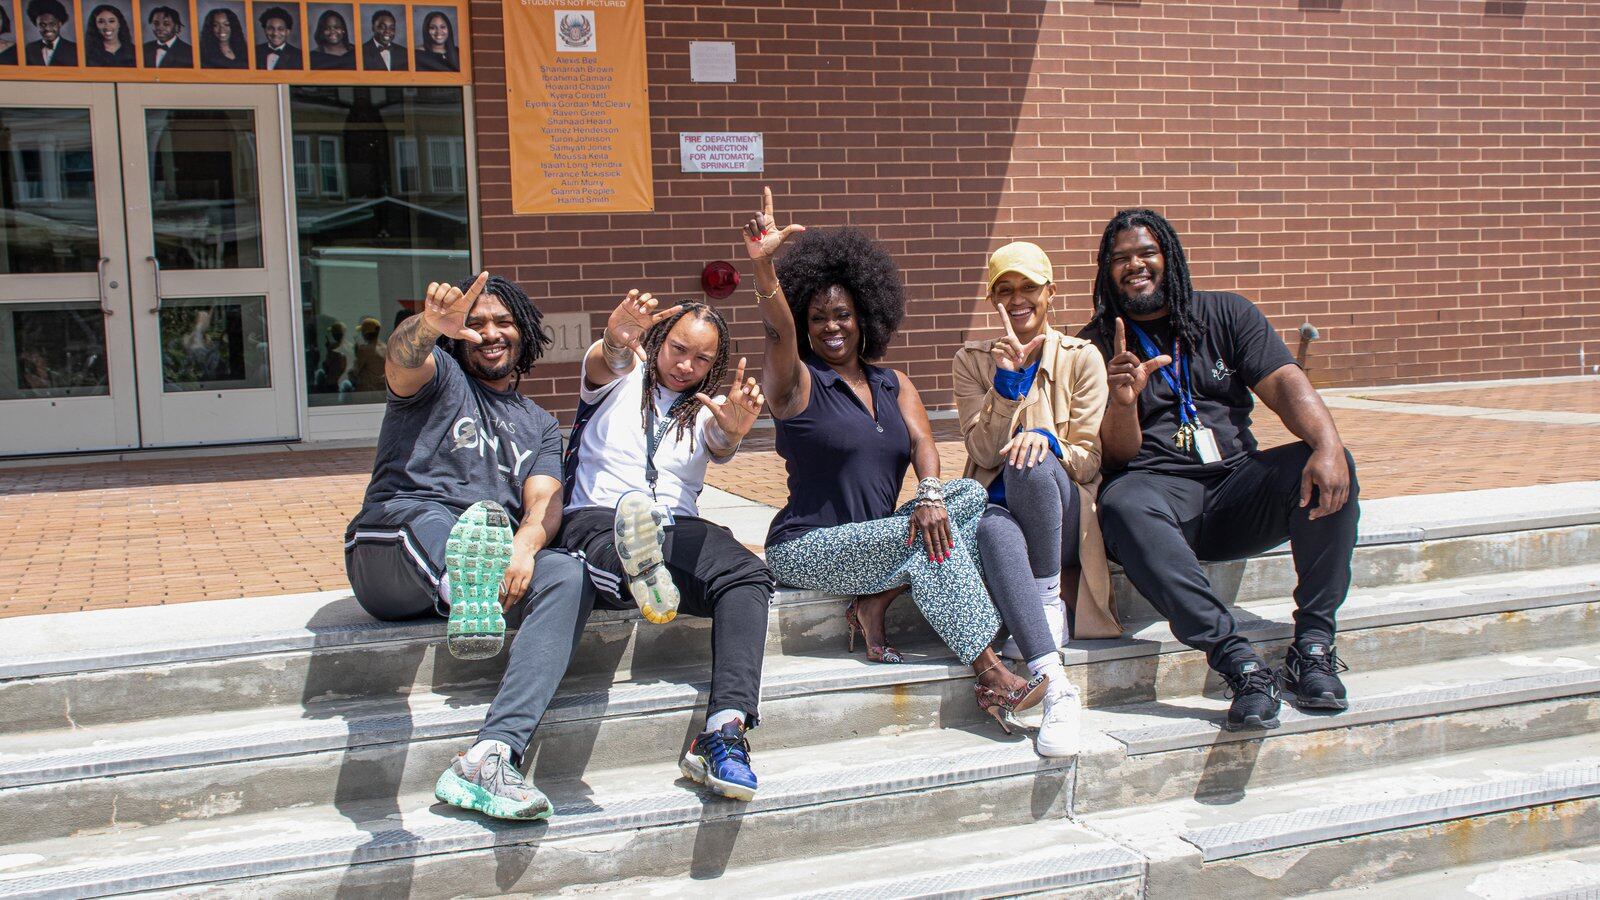 Five people pose and gesture during a portrait on the steps of West Philadelphia High School.